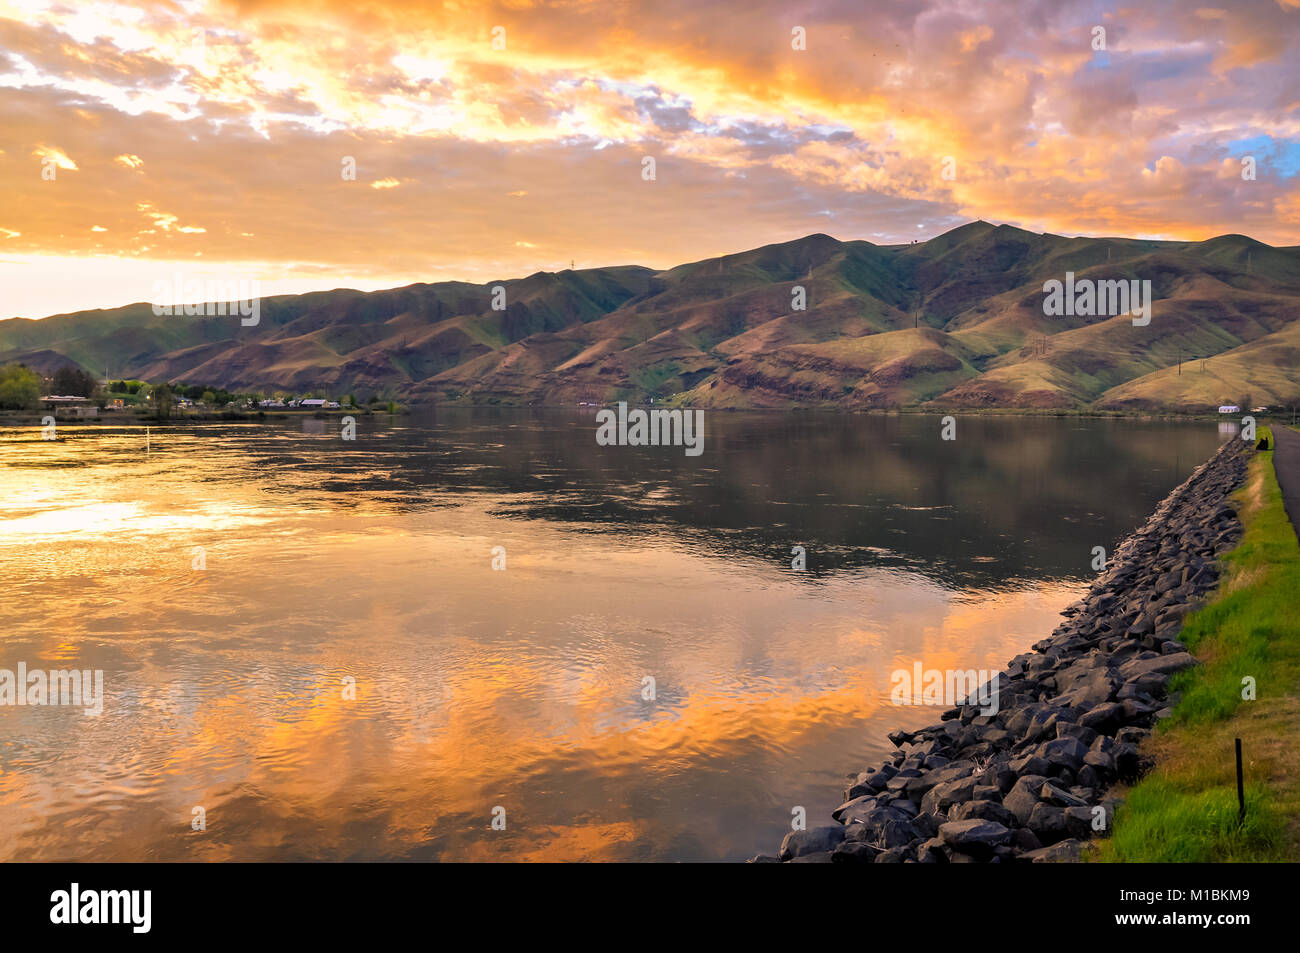 Lake with promenade, sunset sky reflection and foothills Stock Photo